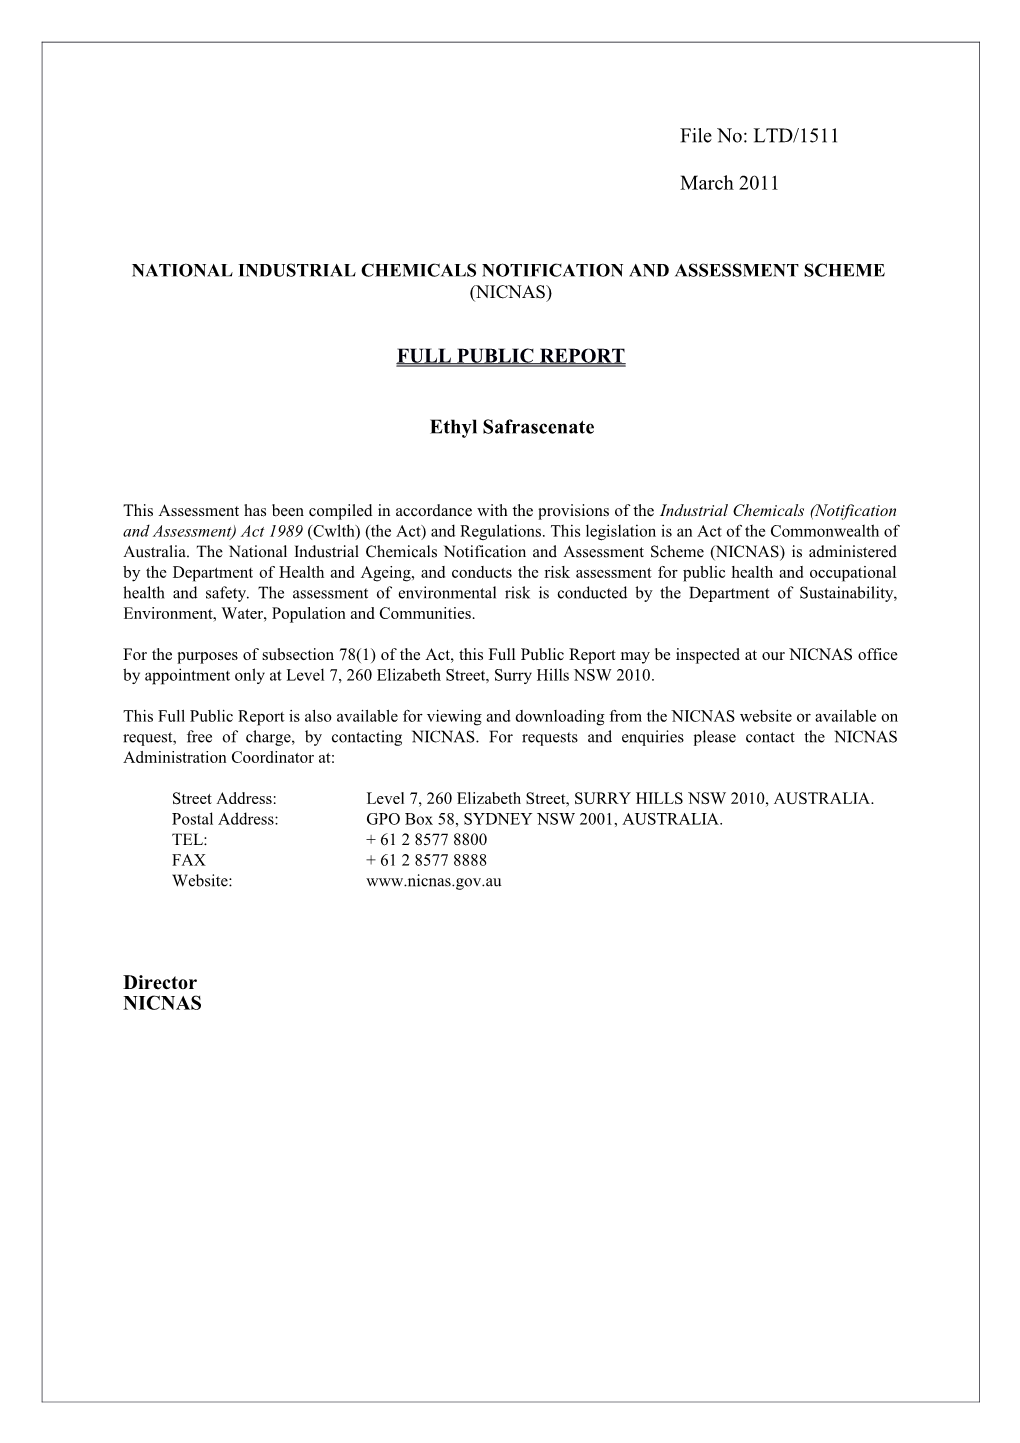 National Industrial Chemicals Notification and Assessment Scheme s56